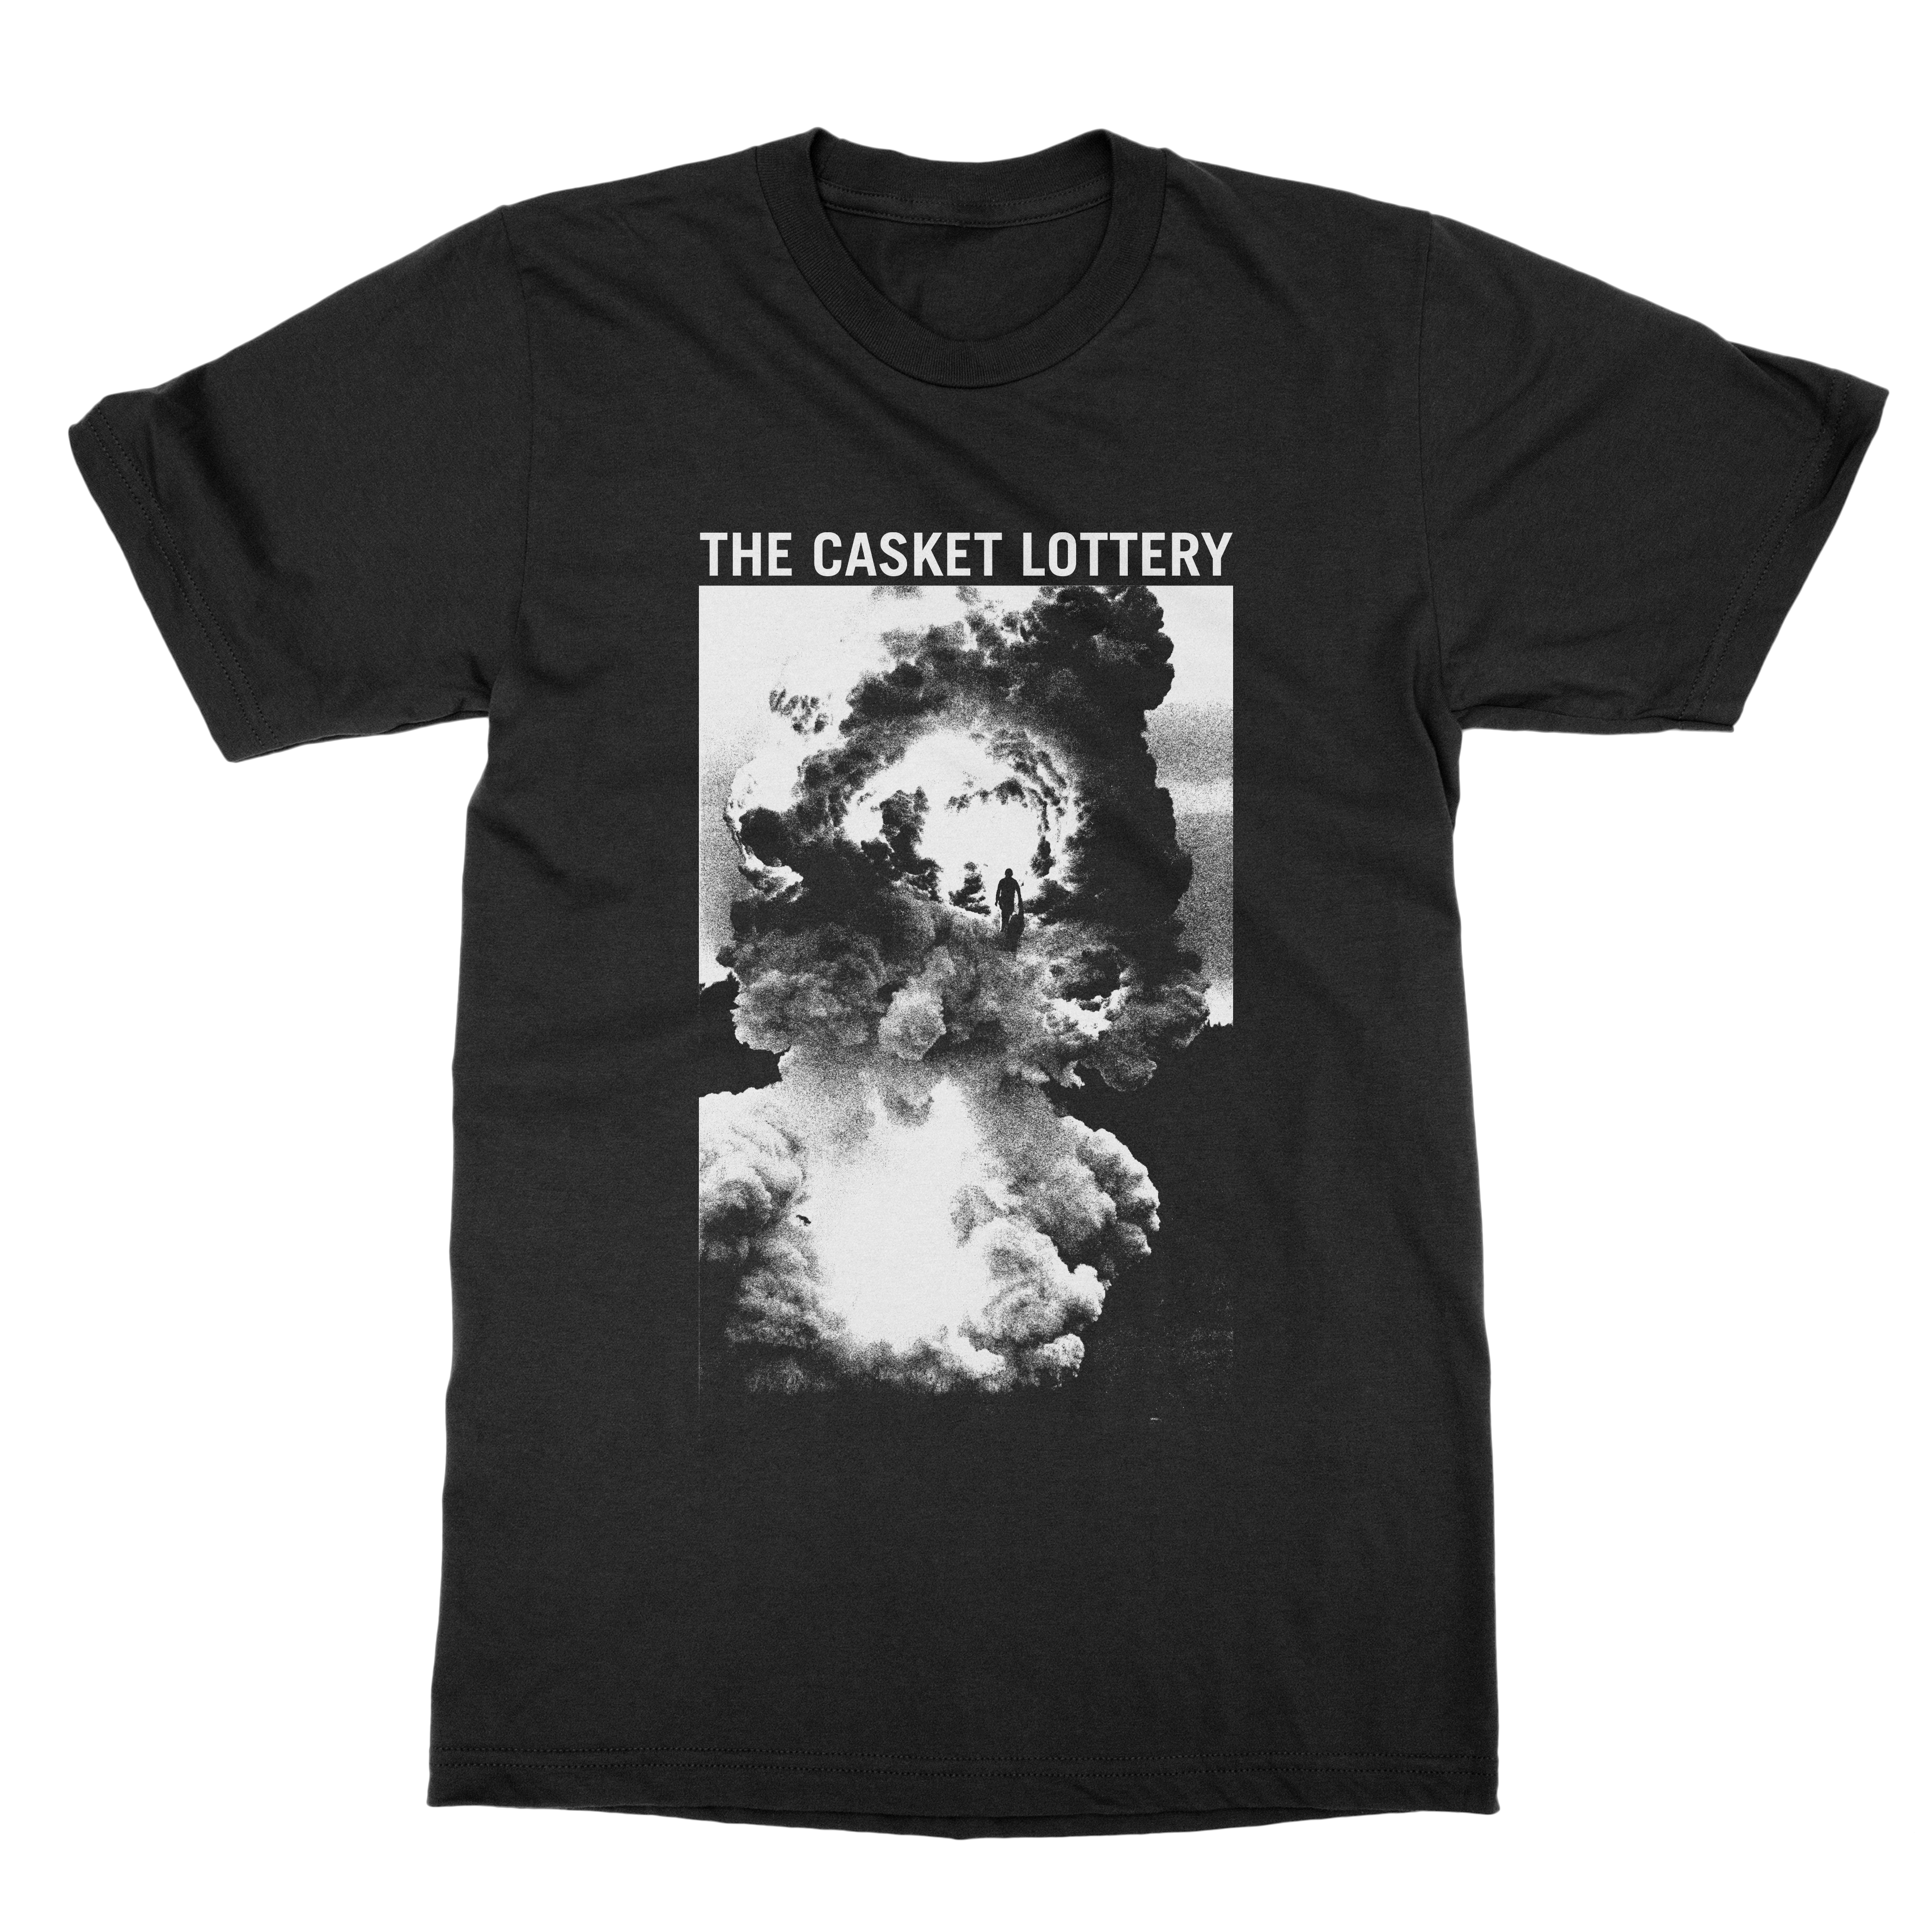 The Casket Lottery | Short Songs for End Times T-Shirt